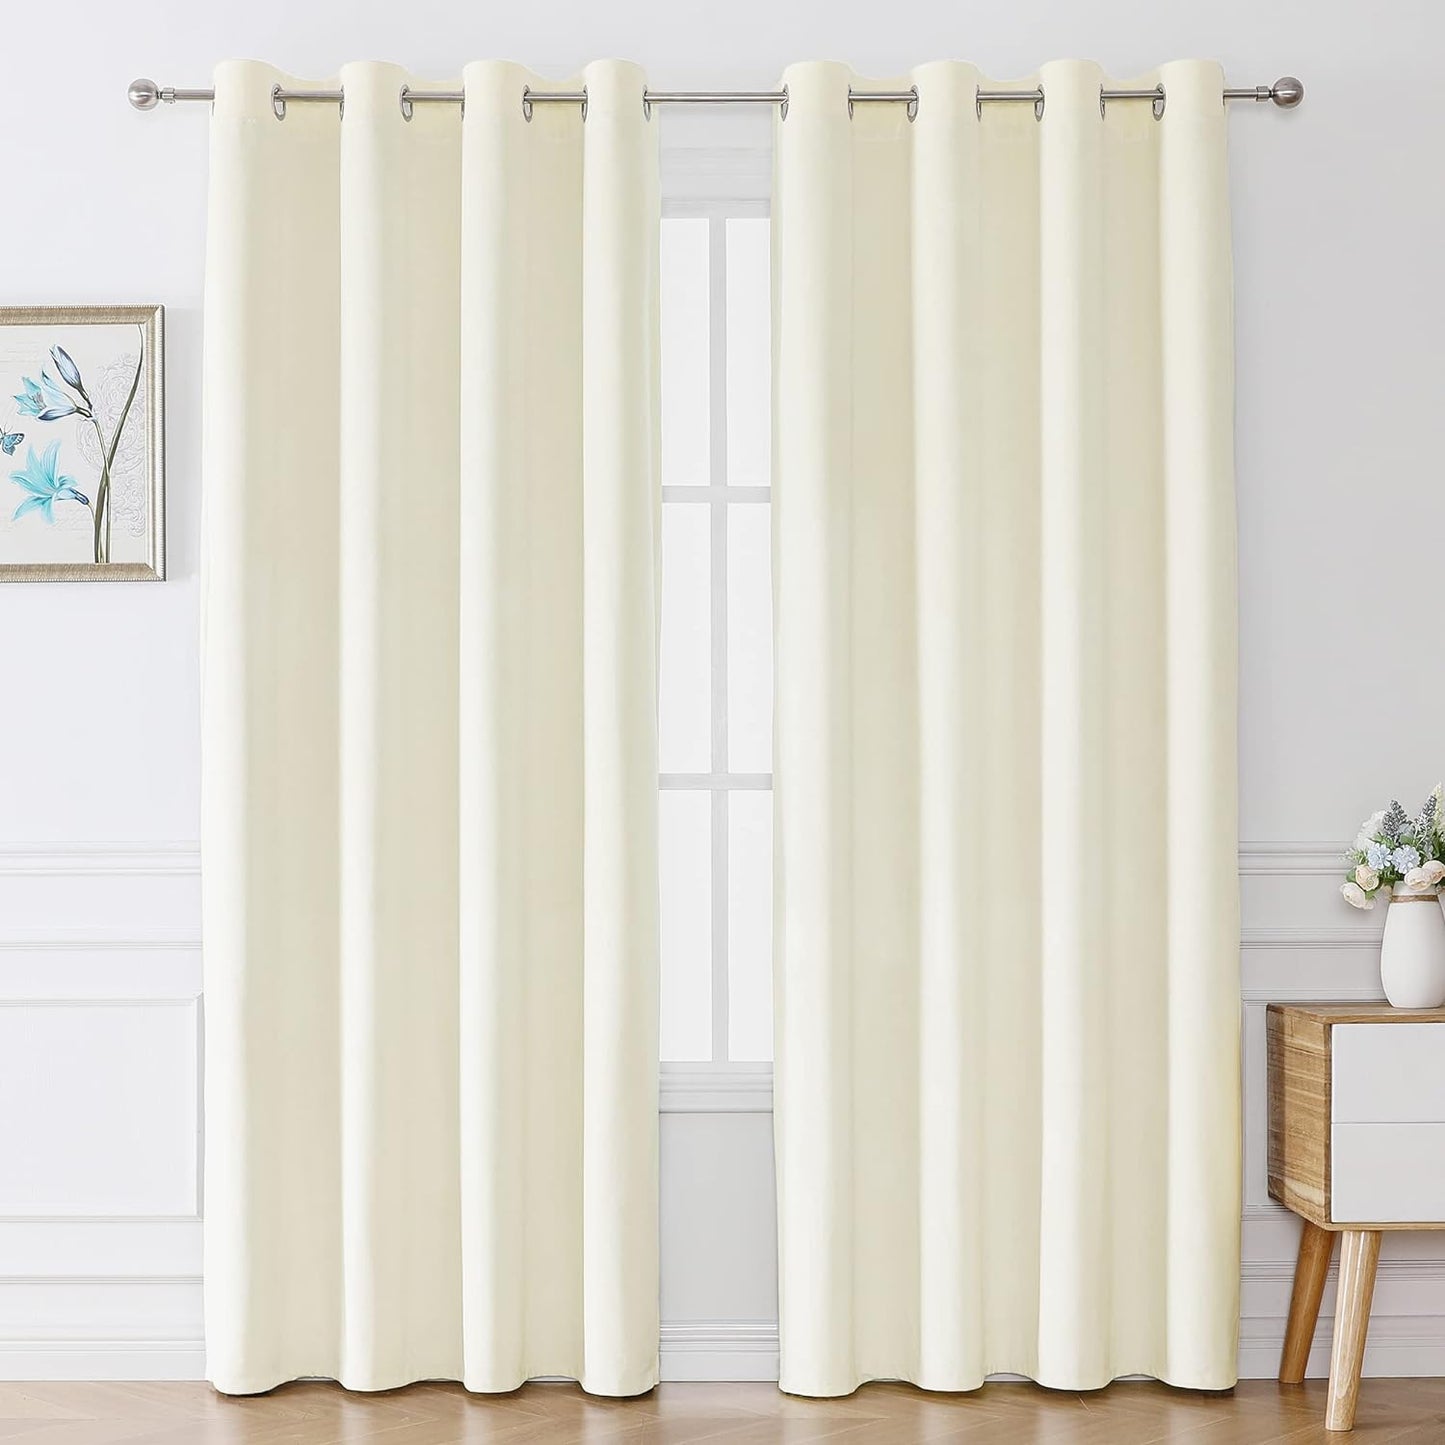 Victree Velvet Curtains for Bedroom, Blackout Curtains 52 X 84 Inch Length - Room Darkening Sun Light Blocking Grommet Window Drapes for Living Room, 2 Panels, Navy  Victree Cream 52 X 96 Inches 